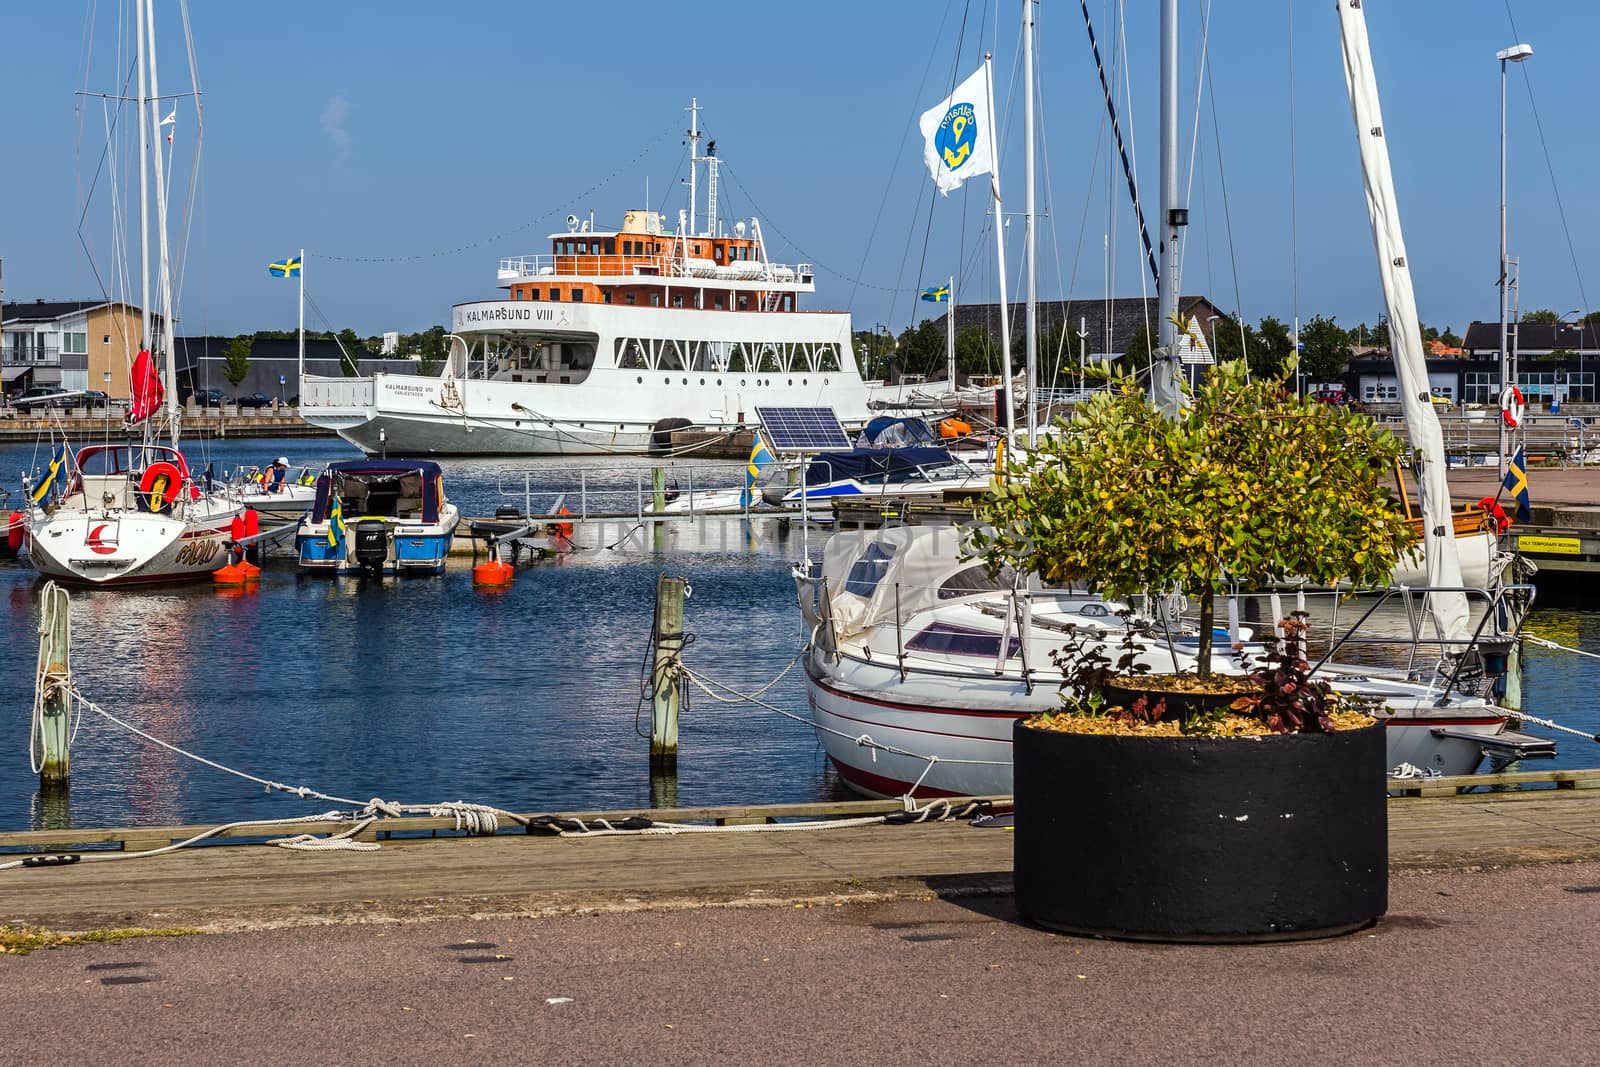 Scenes from the marina in Farjestaden (ferry city) on the Oland island. City is named after the ferries that used to be the only connection to the mainland.